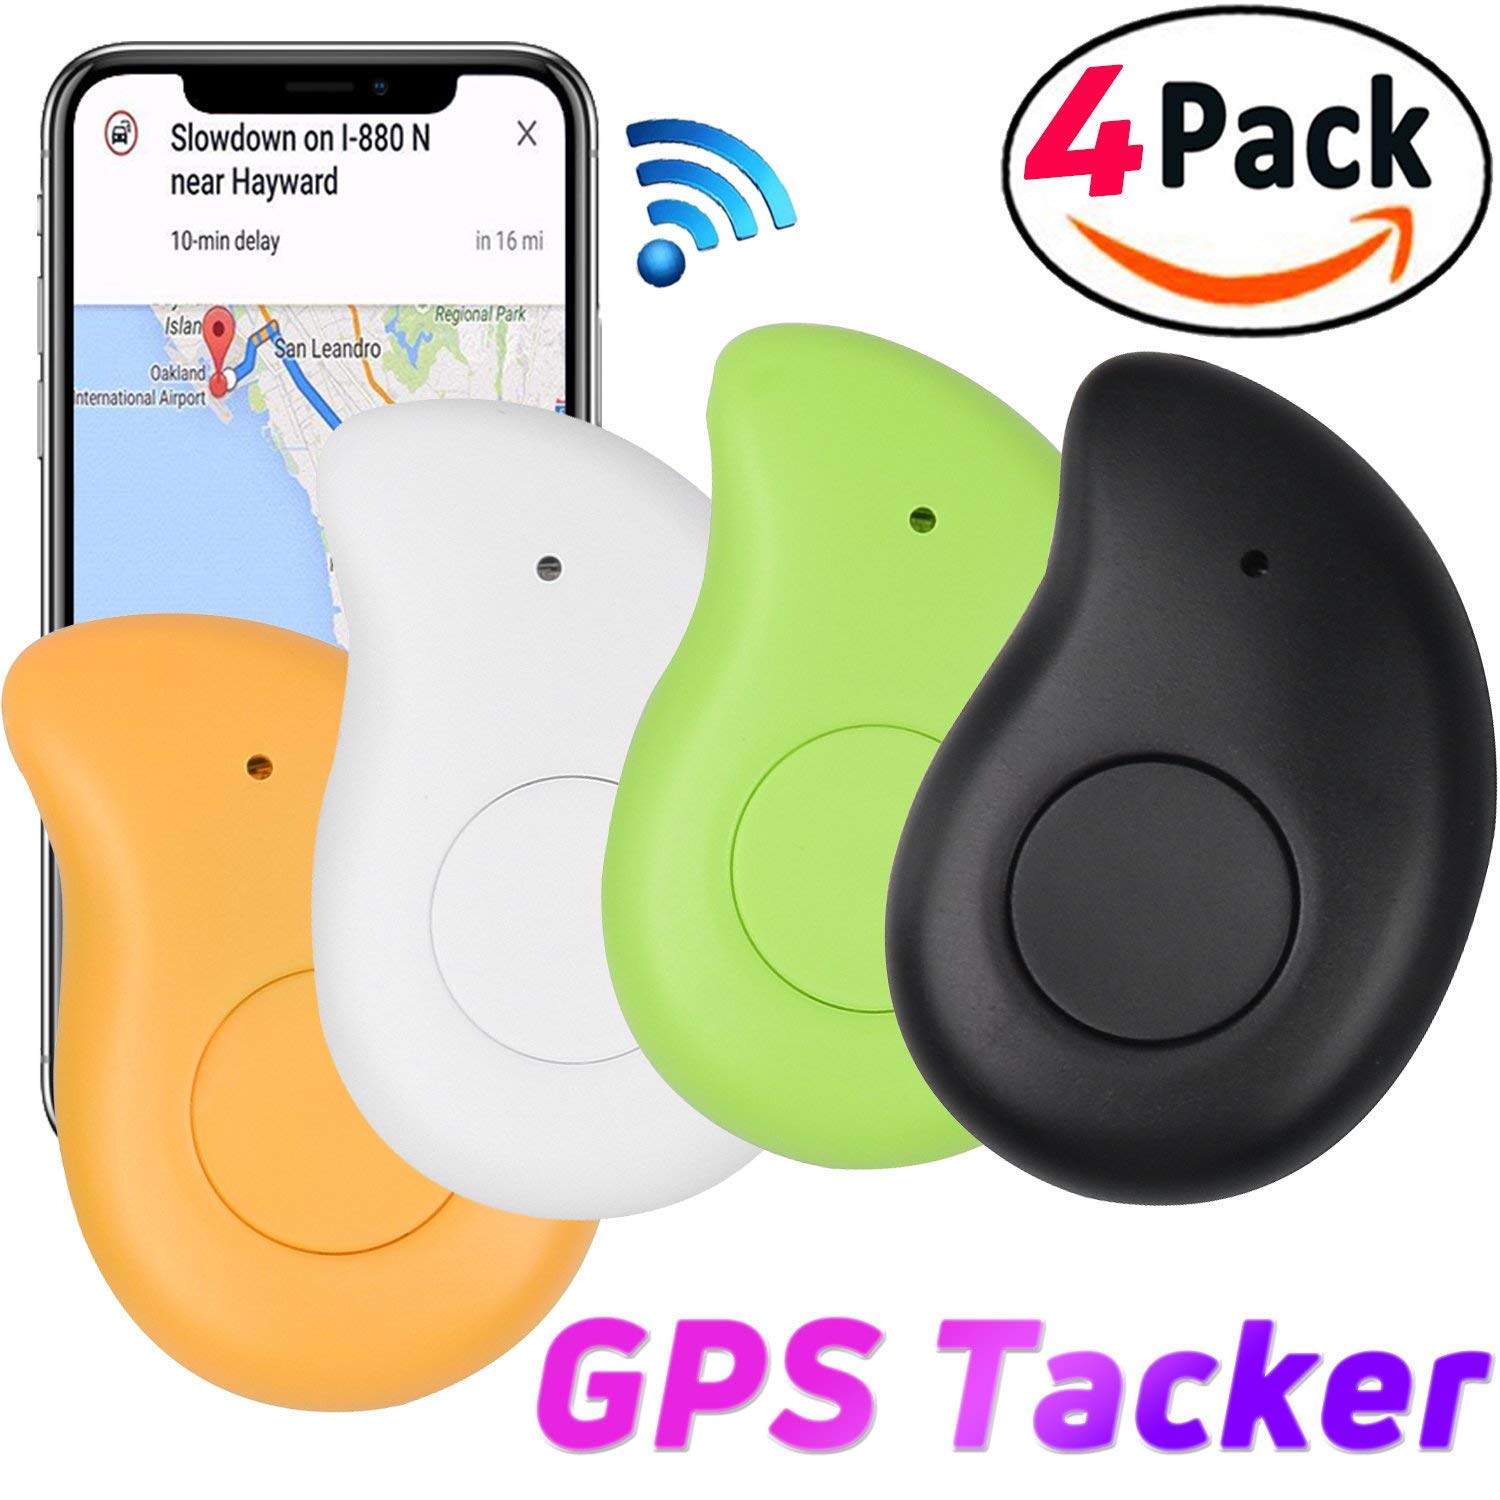 1pcs Gellphak 2020 Upgrade Magnetic Mini GPS Locator Use with Smartphone and Track Real-Time Location Mini Hidden Tracking Device for Kids and Seniors 